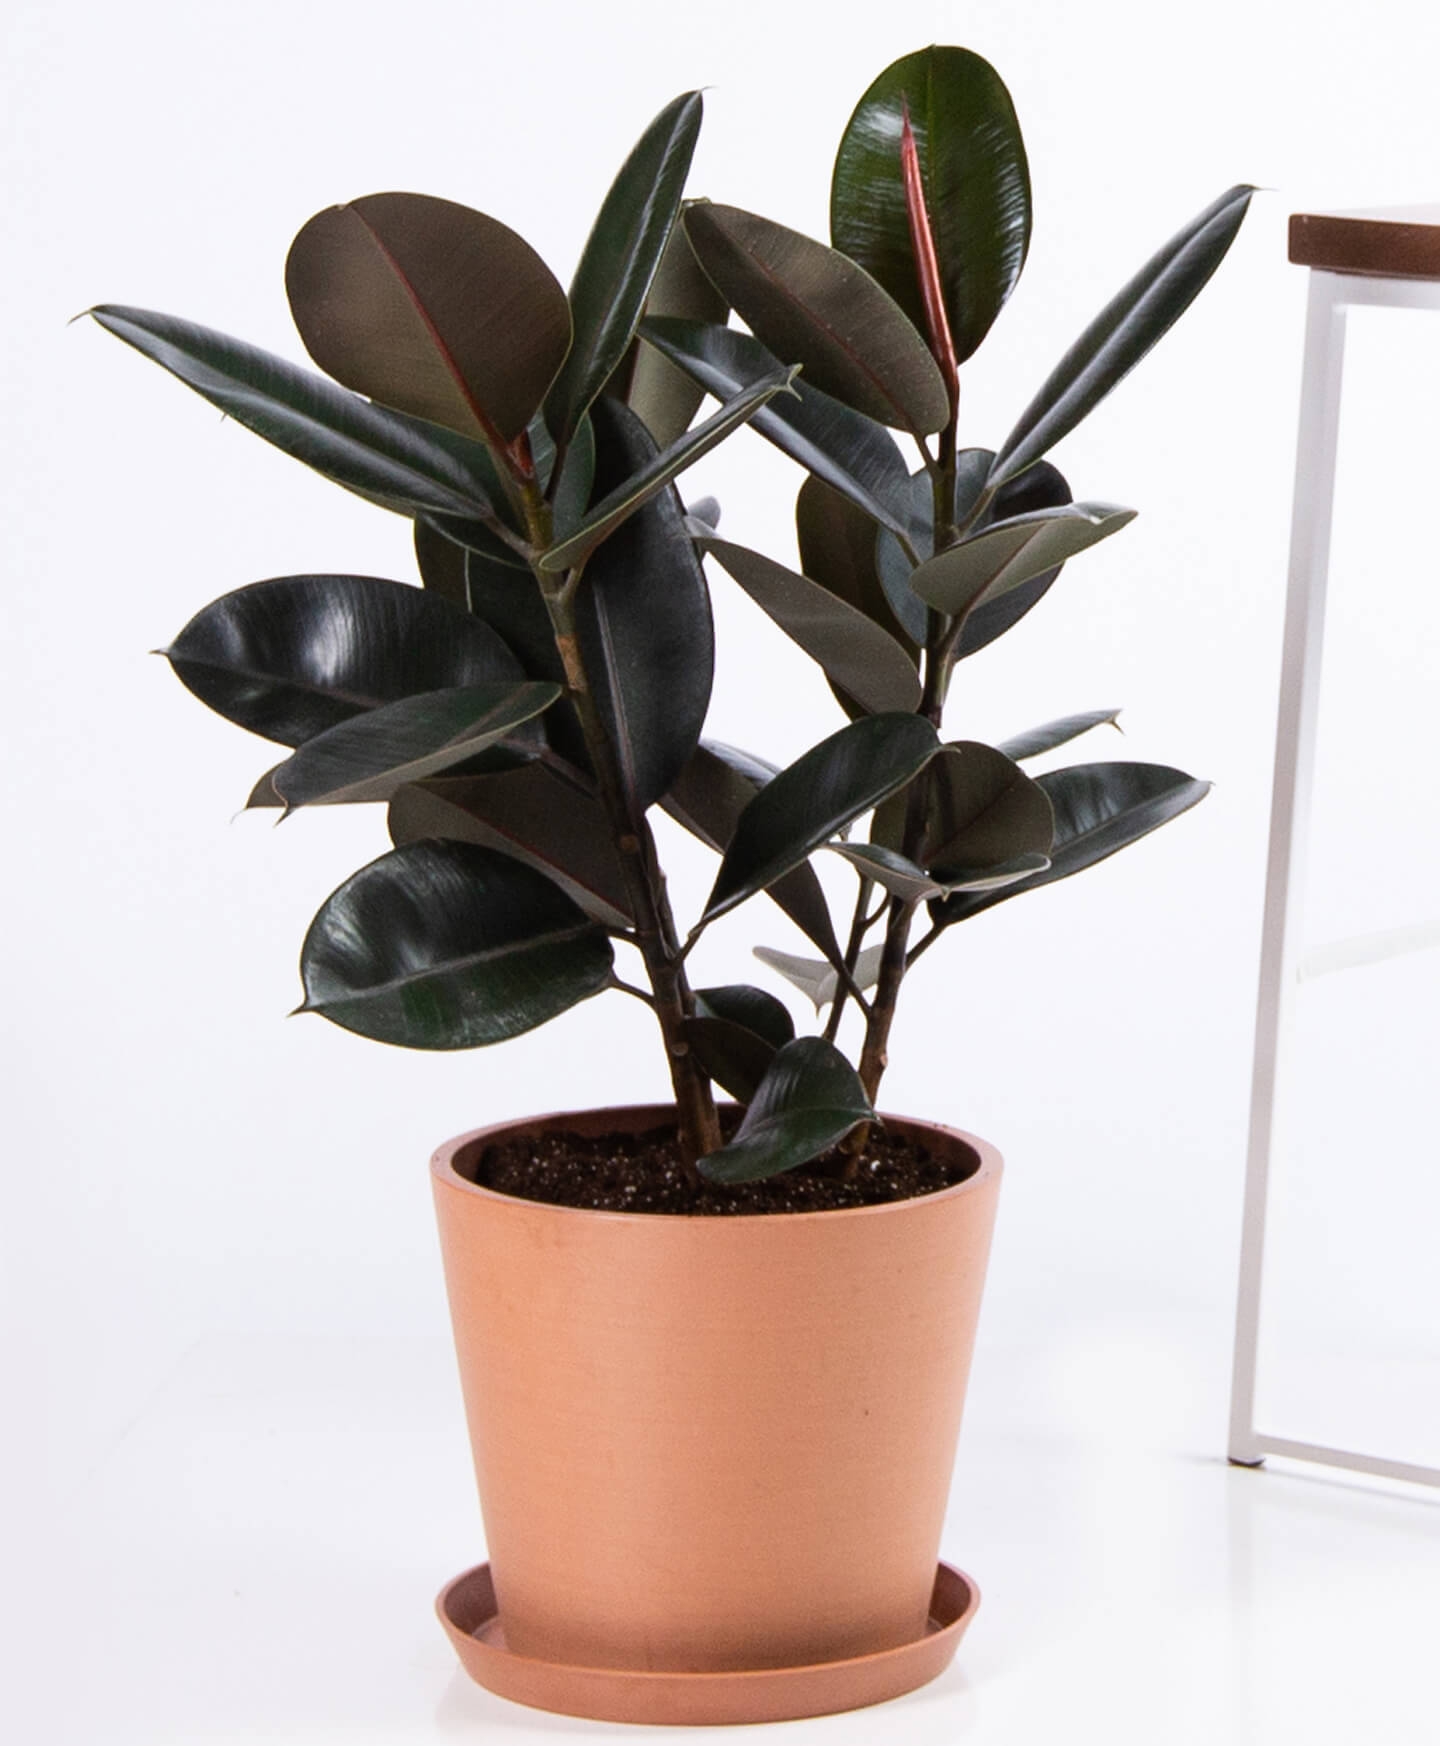 Burgundy rubber tree - Clay - Image 0